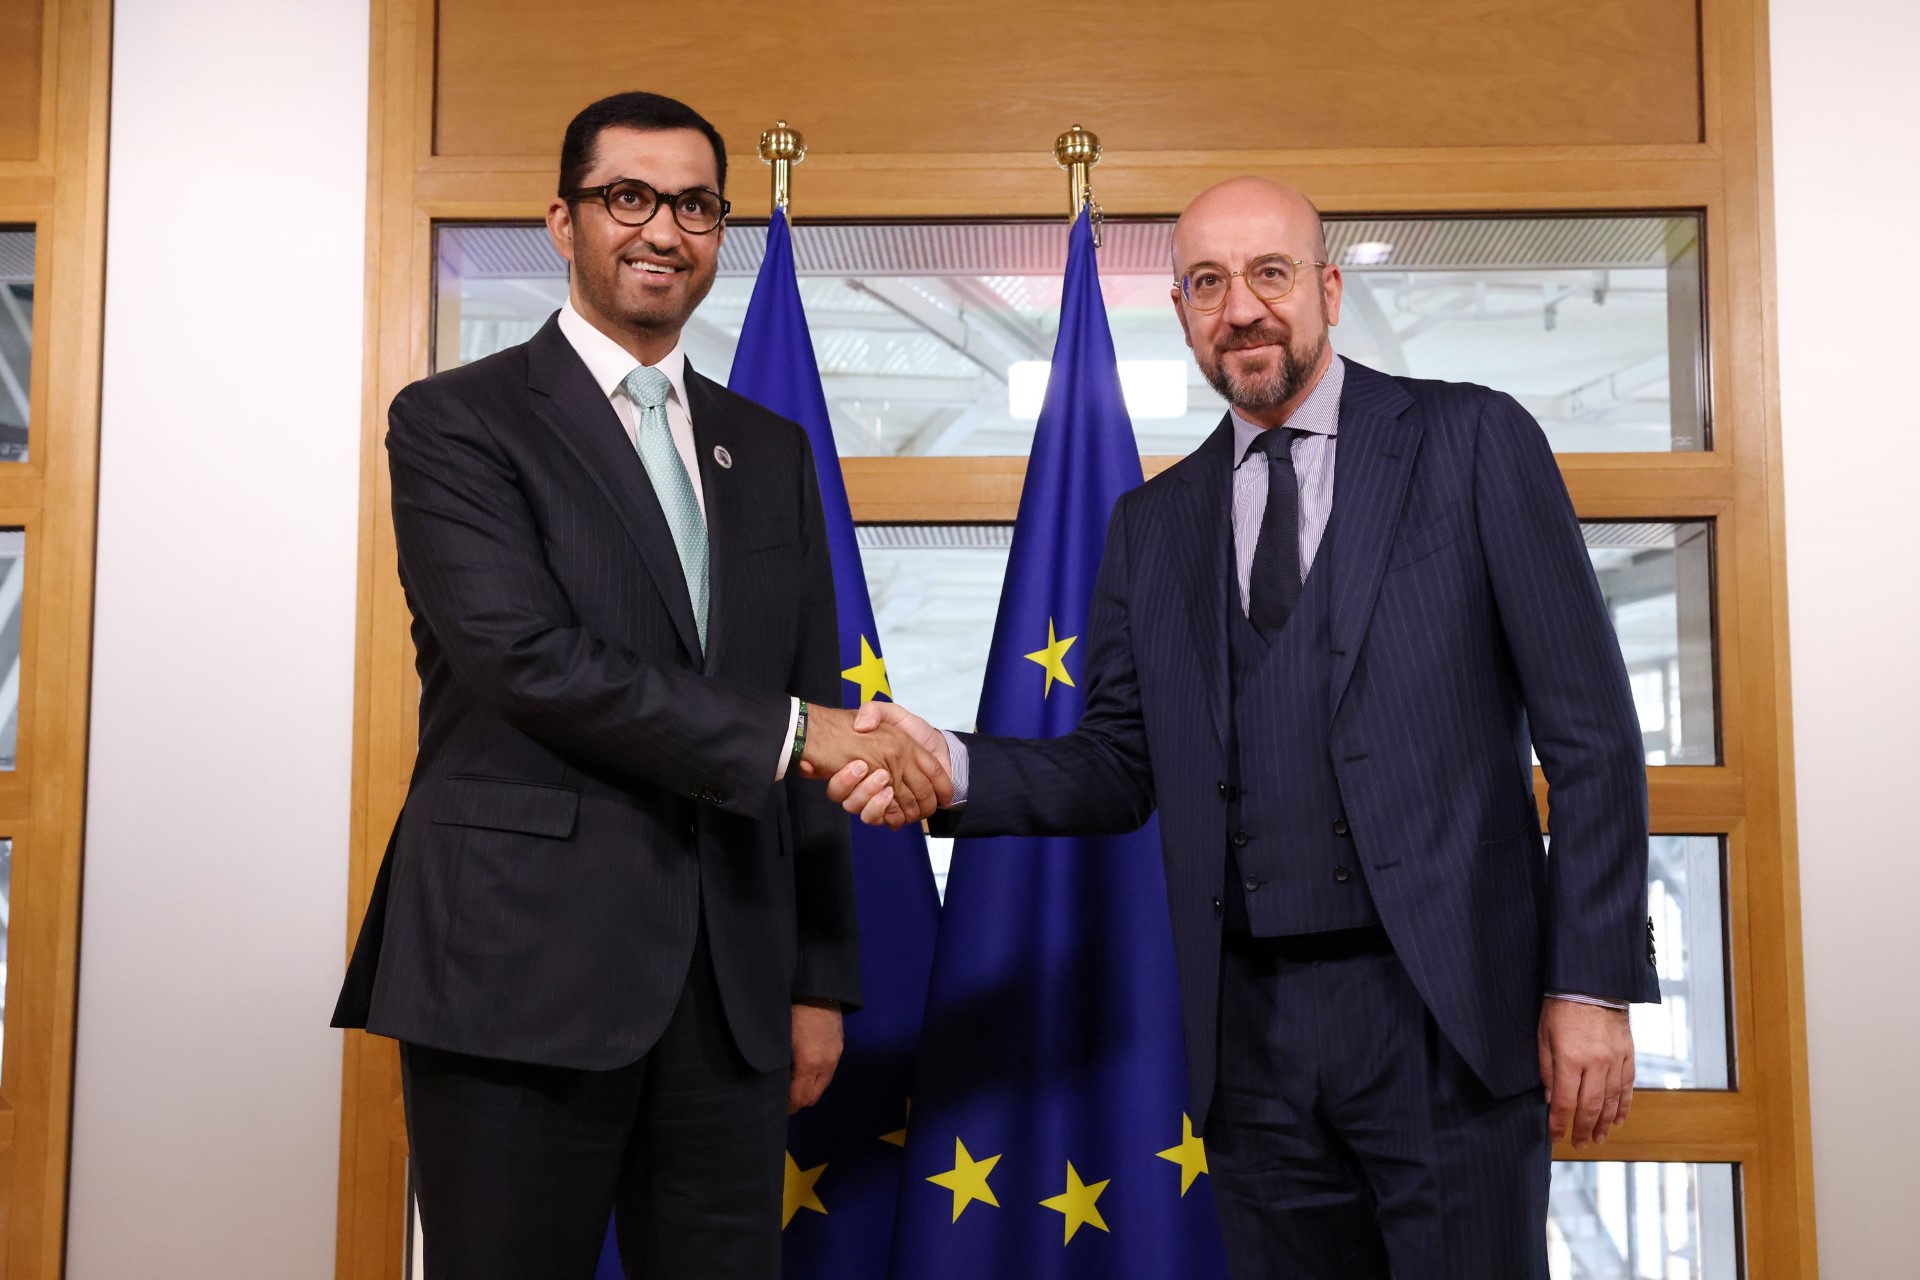 The President of the European Council met with the COP28 President-designate